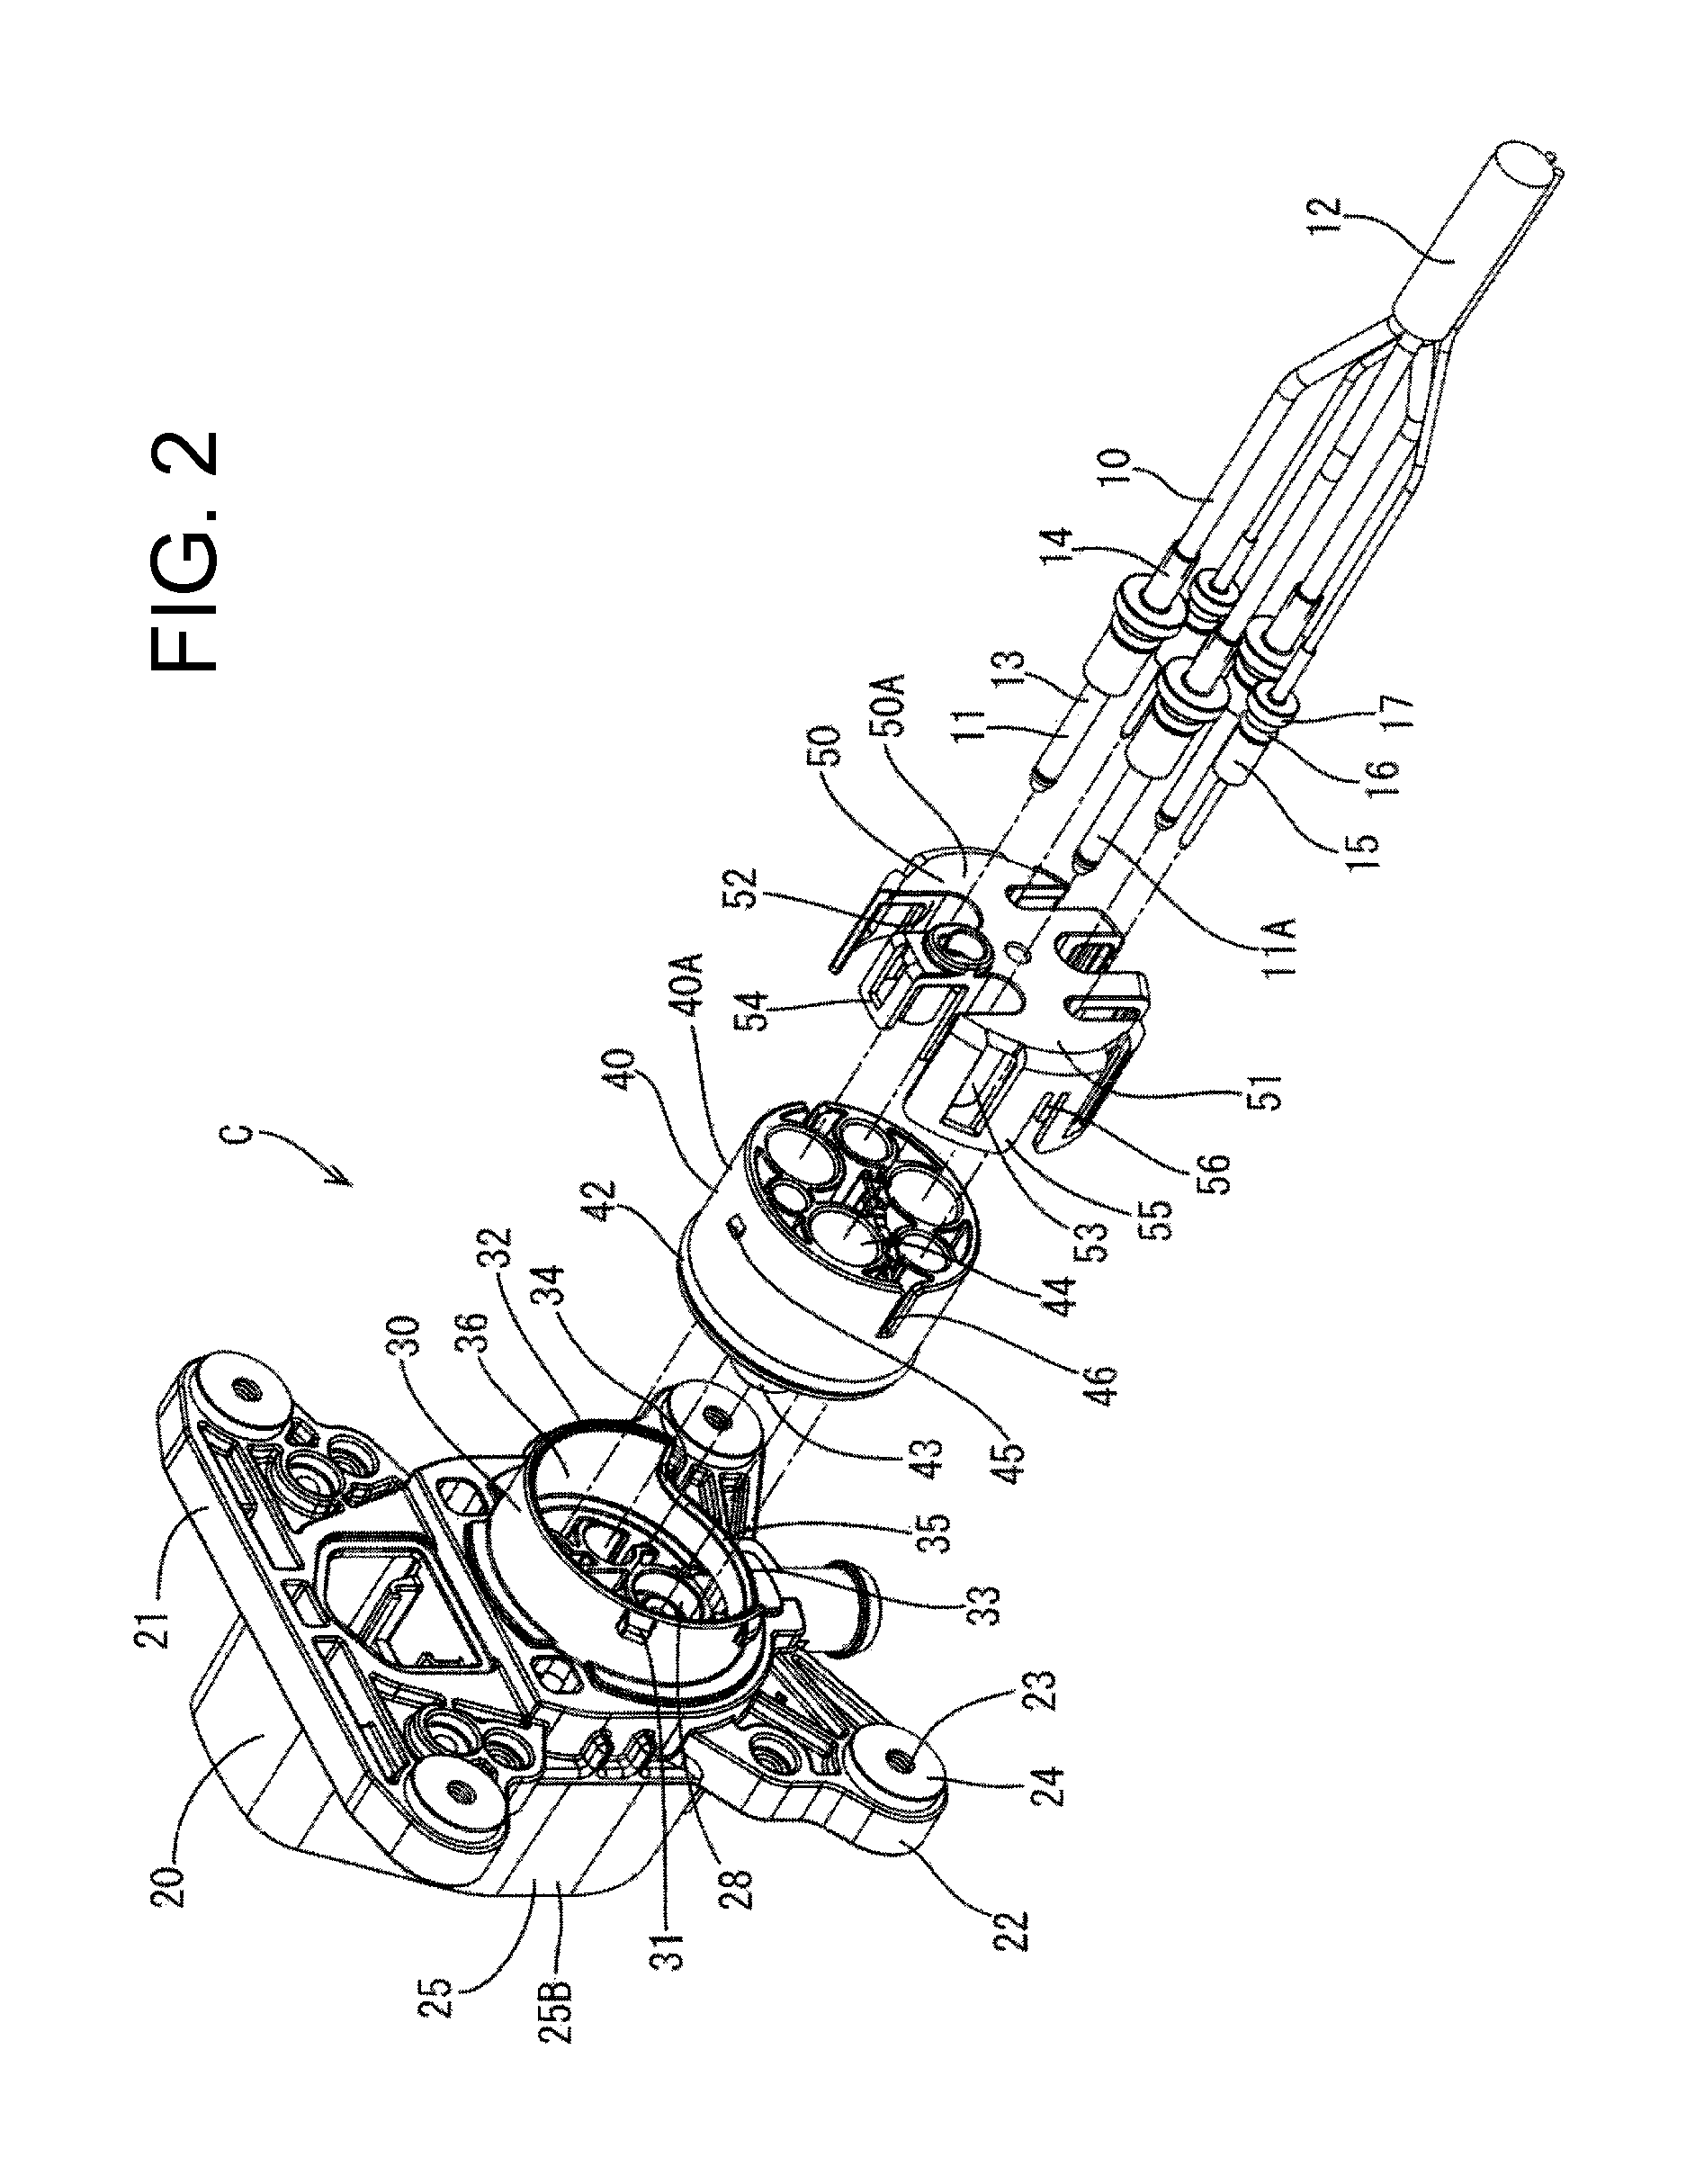 Vehicle-side connector having a housing with wire draw-out openings in different directions